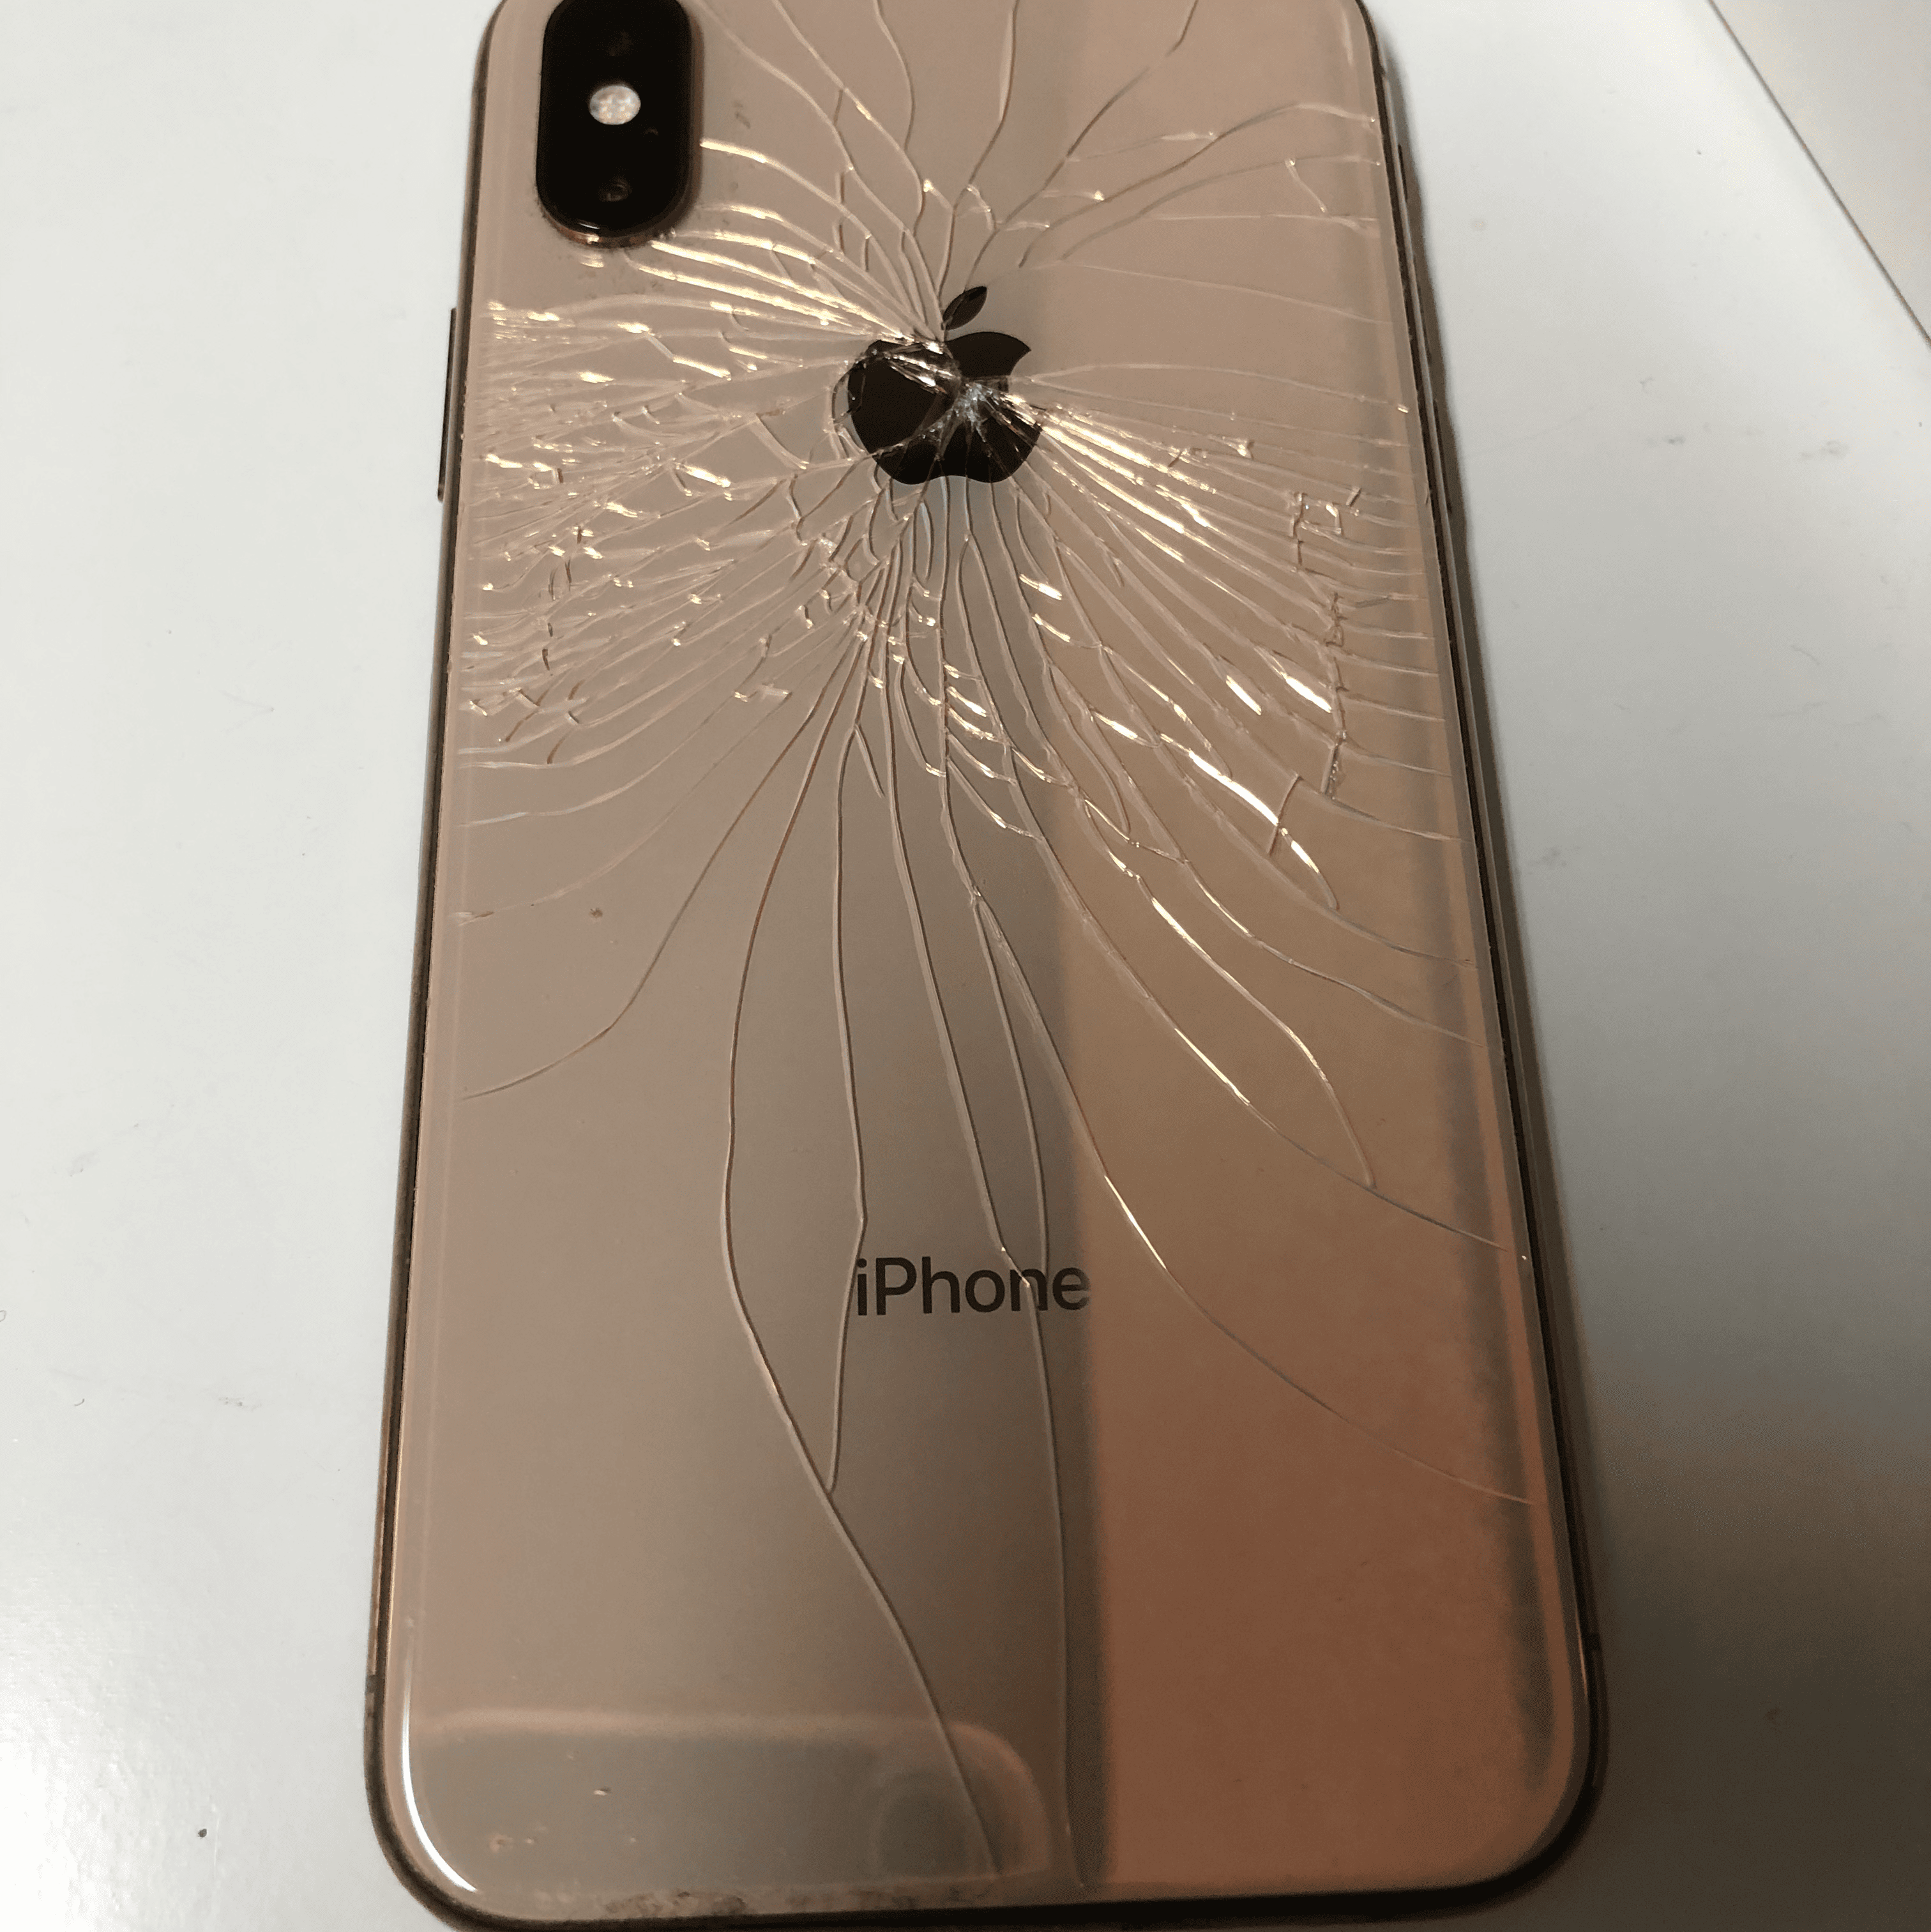 IPhone Repairing - Daly City, CA, US, cell phone doctor near me